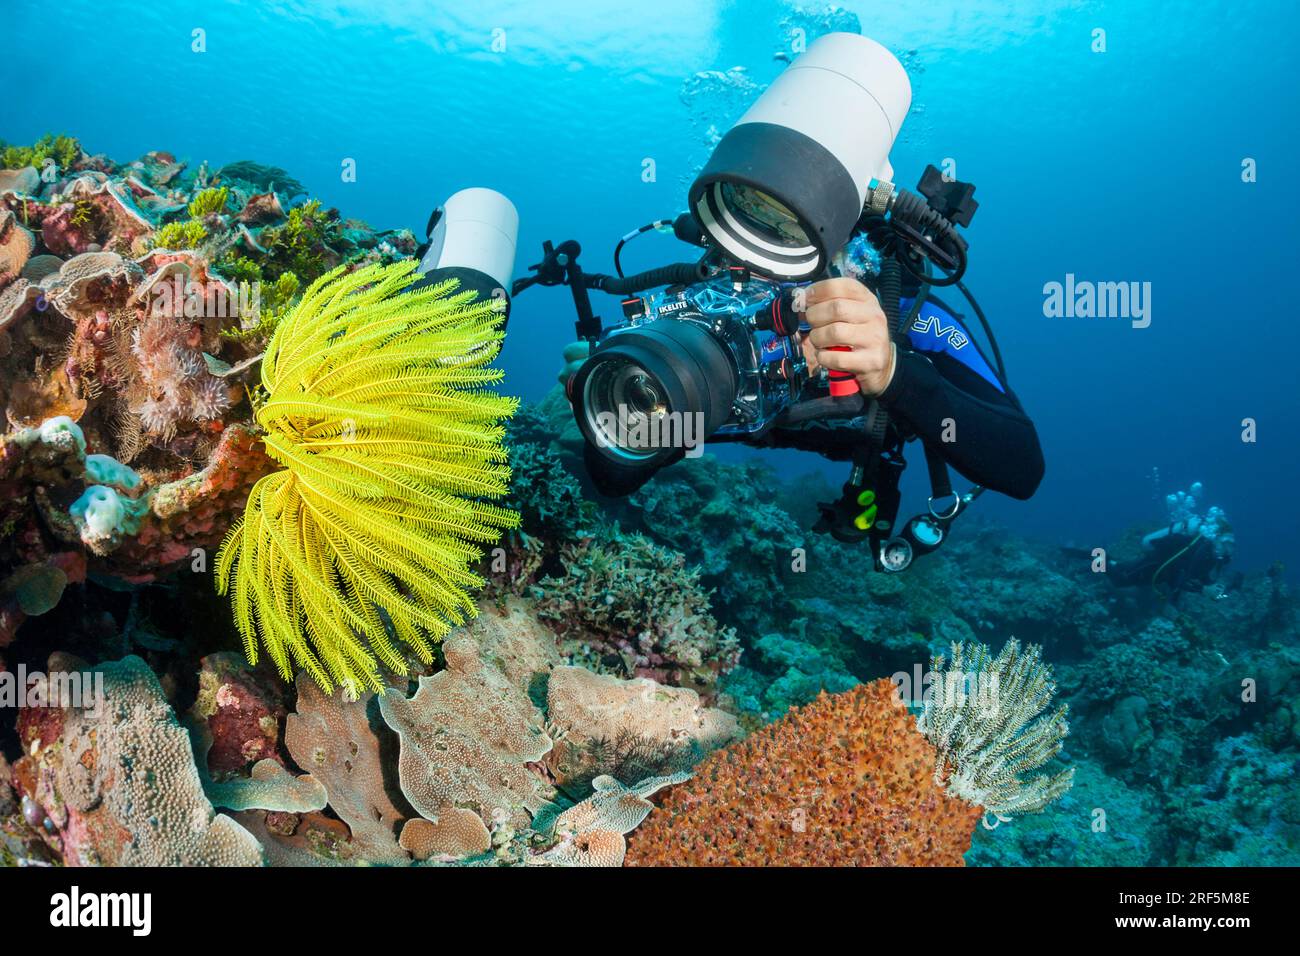 A diver shooting a digital SLR lines up on a crinoid, Oxycomanthus bennetti, also referred to as a sea lily or feather star, on an Indonesian reef. Stock Photo